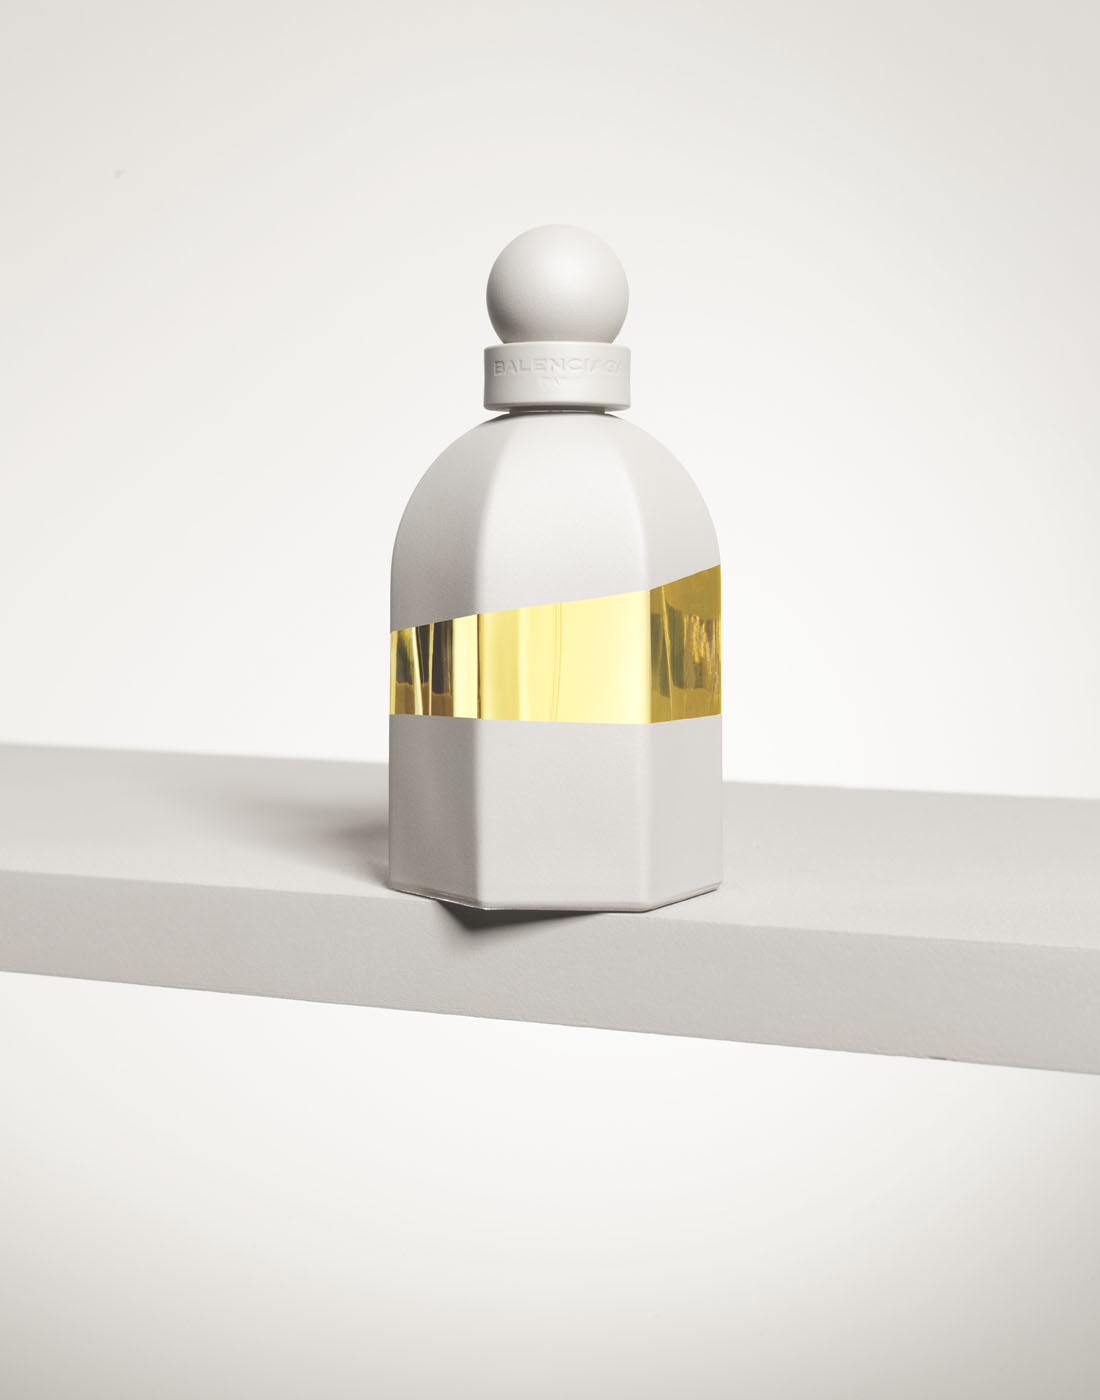 Perfume in white studio by Alexander Kent London based still life and product photographer.